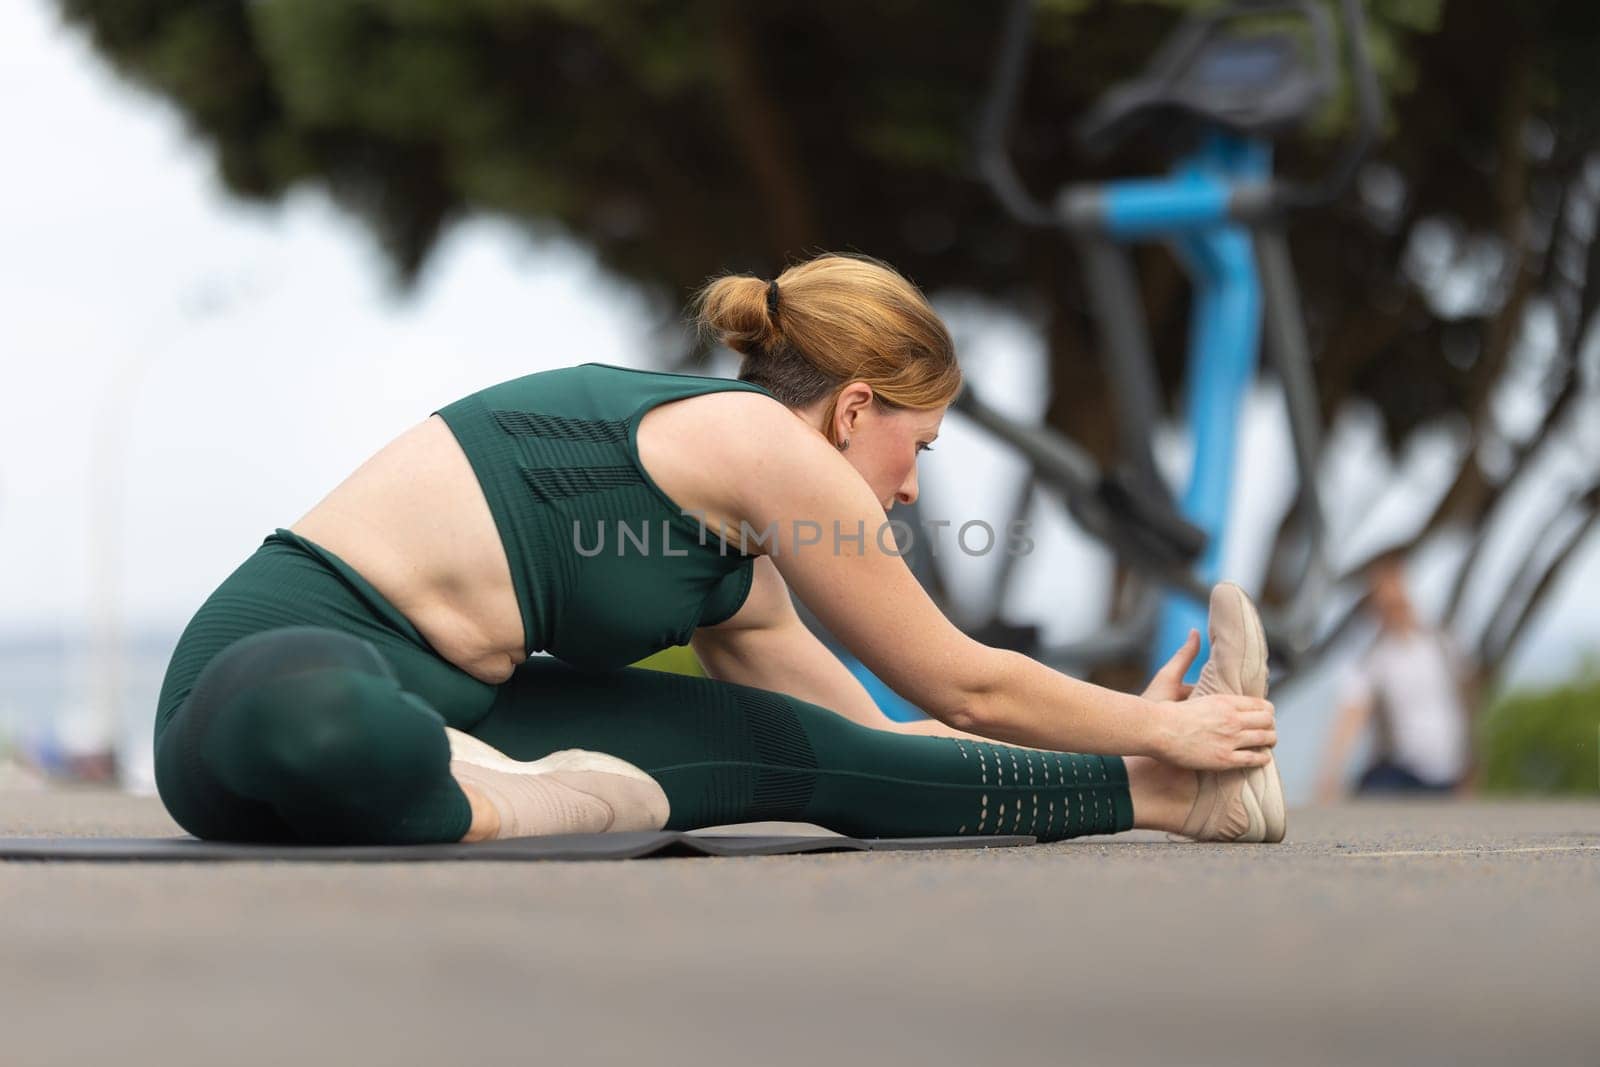 Adult woman sitting in a splits at the outdoor sports ground and stretching down to her leg. Mid shot